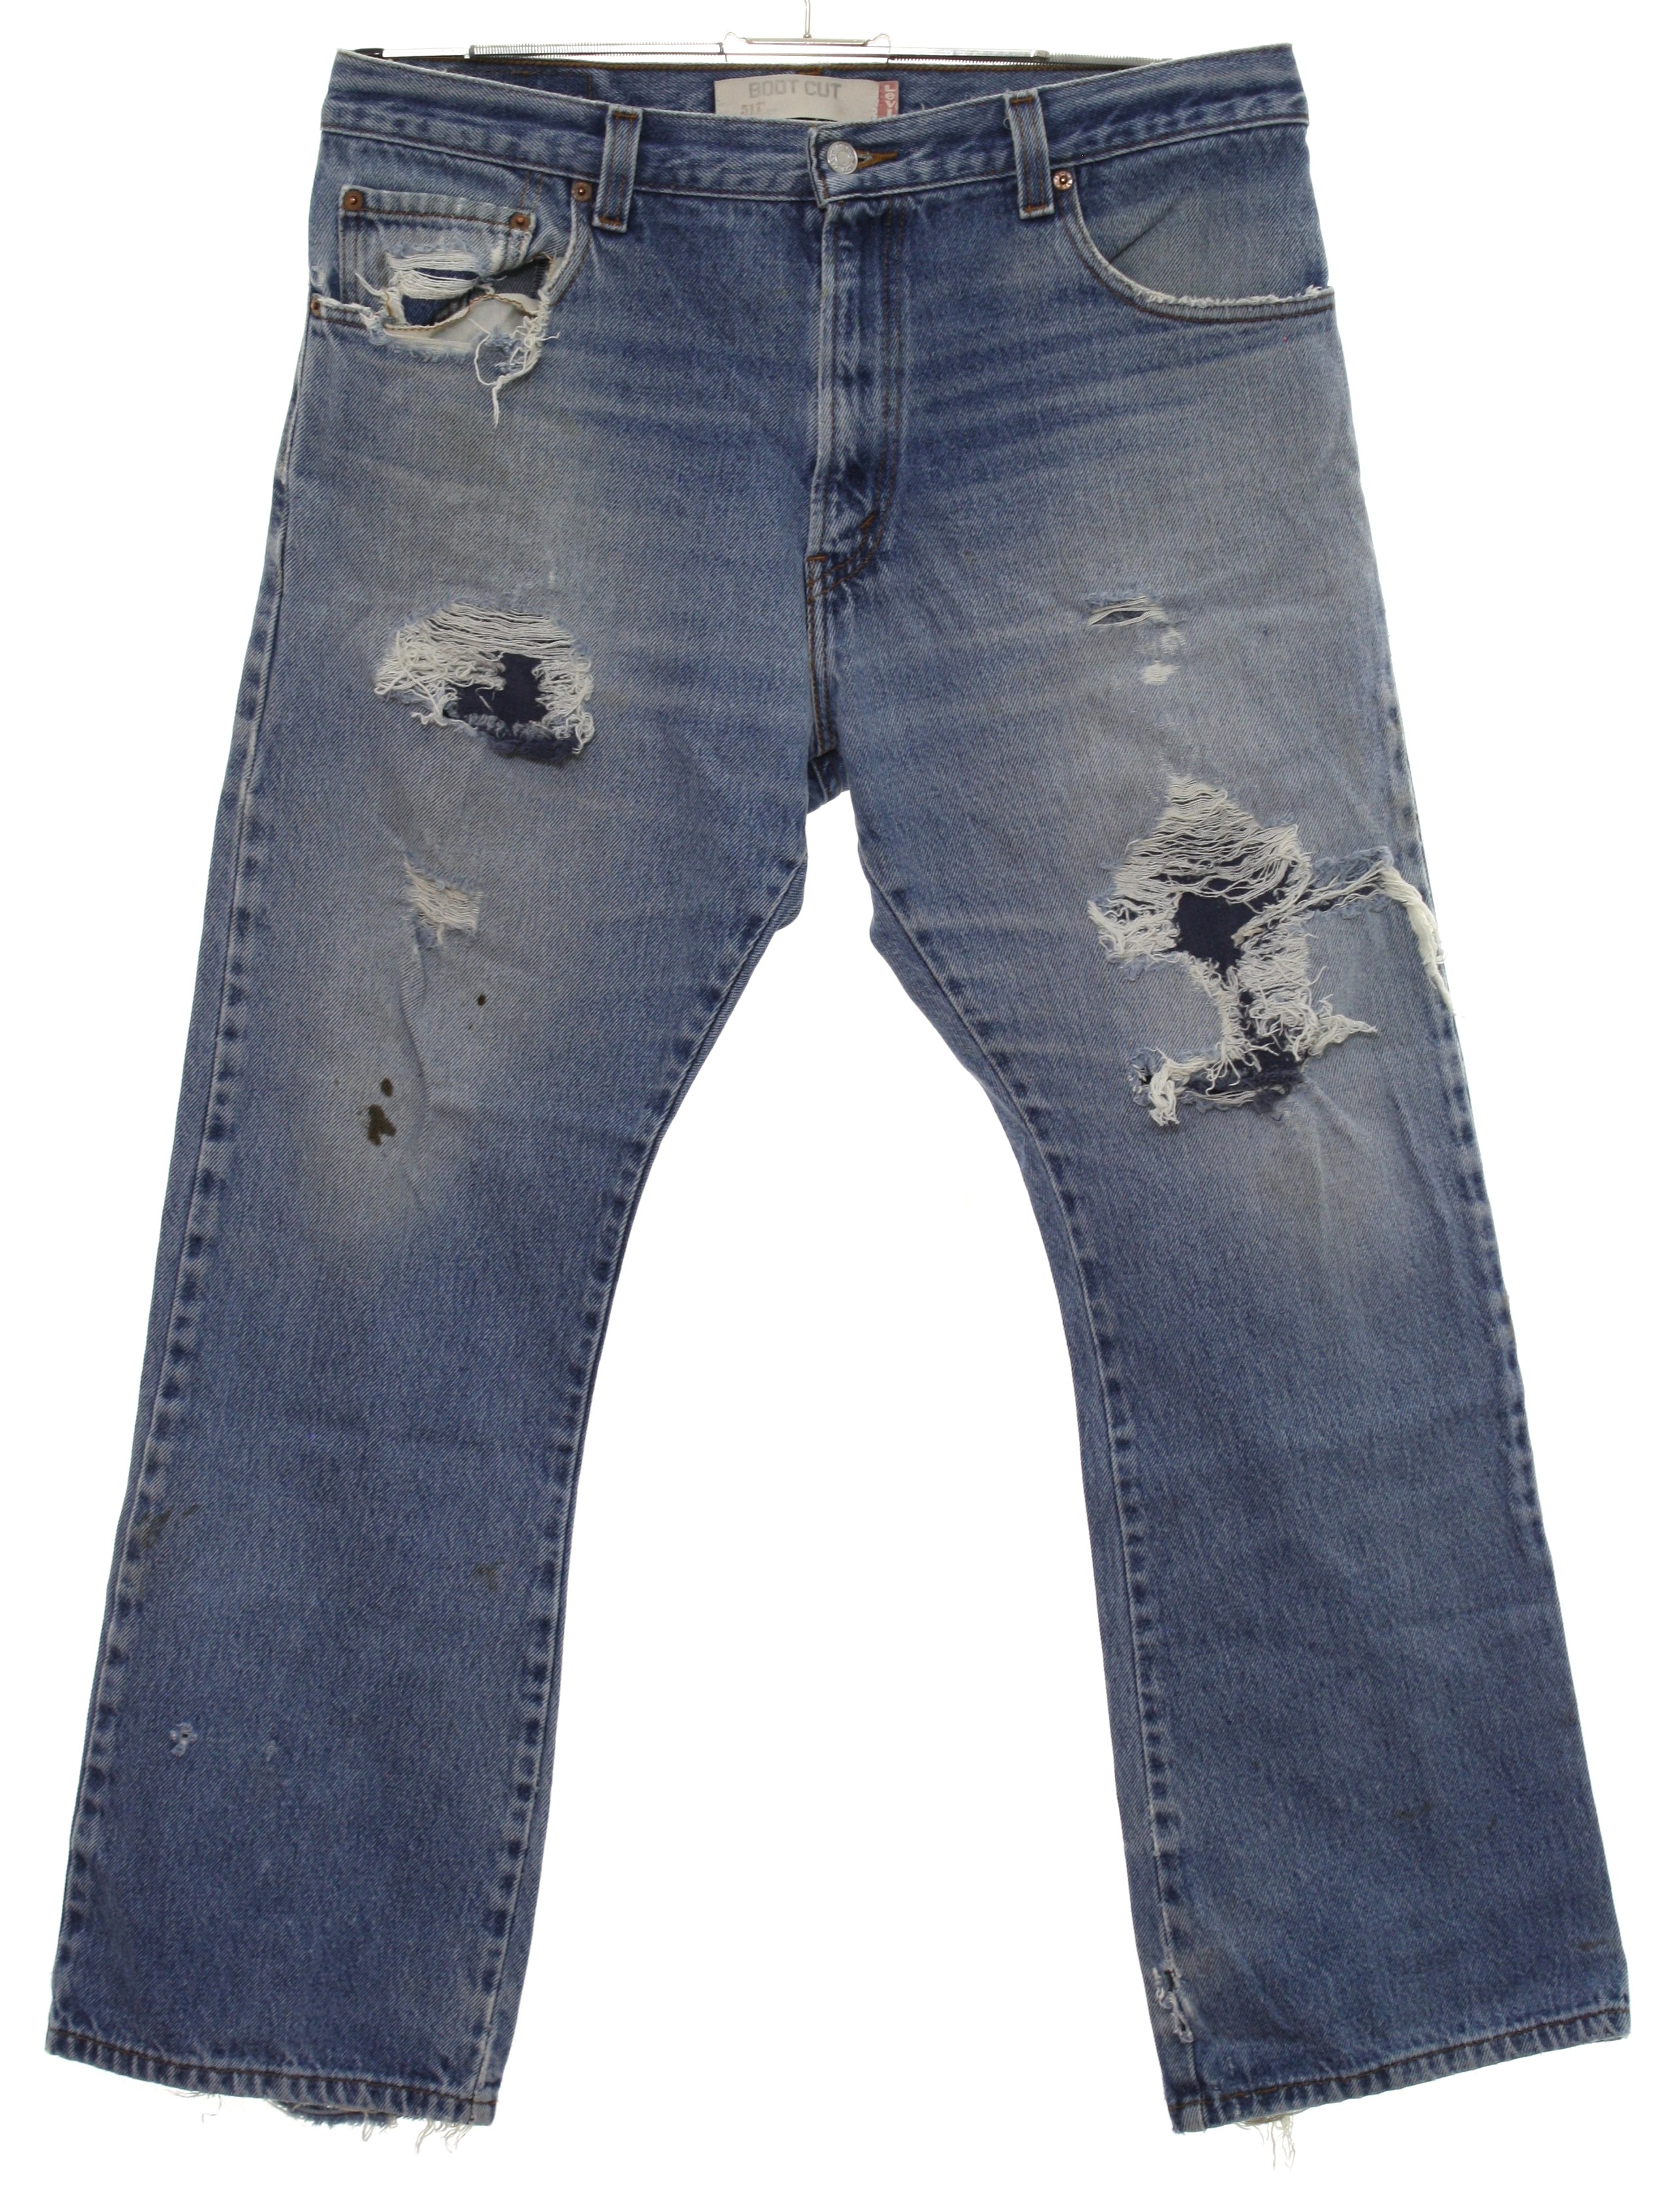 Nineties Flared Pants / Flares: 90s or Newer Levis 517- Mens stone ...